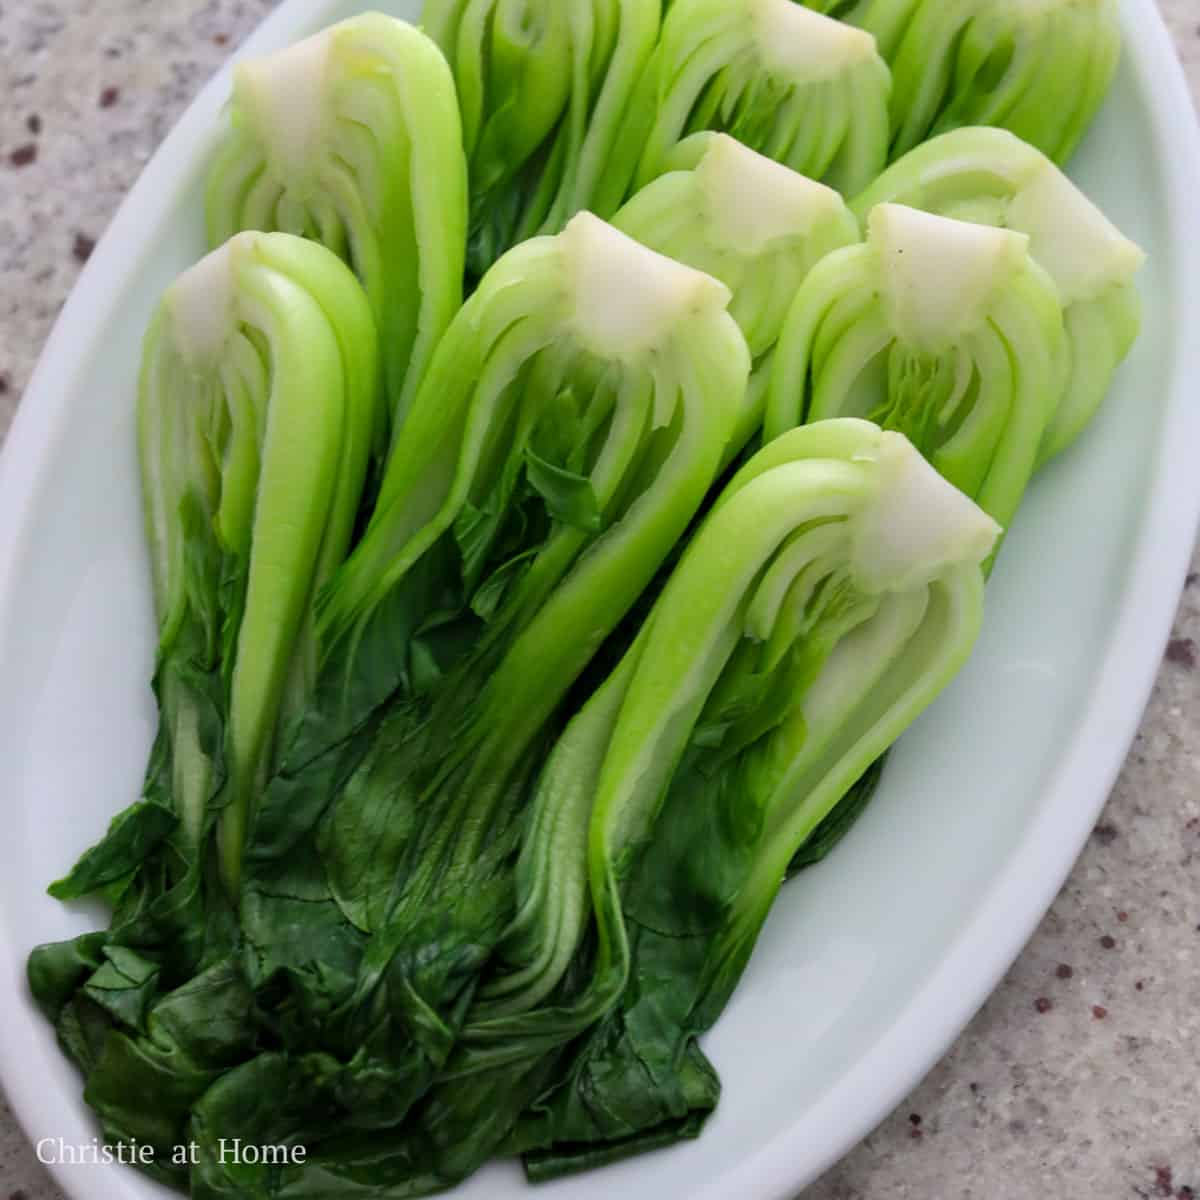 transfer bok choy to a serving plate